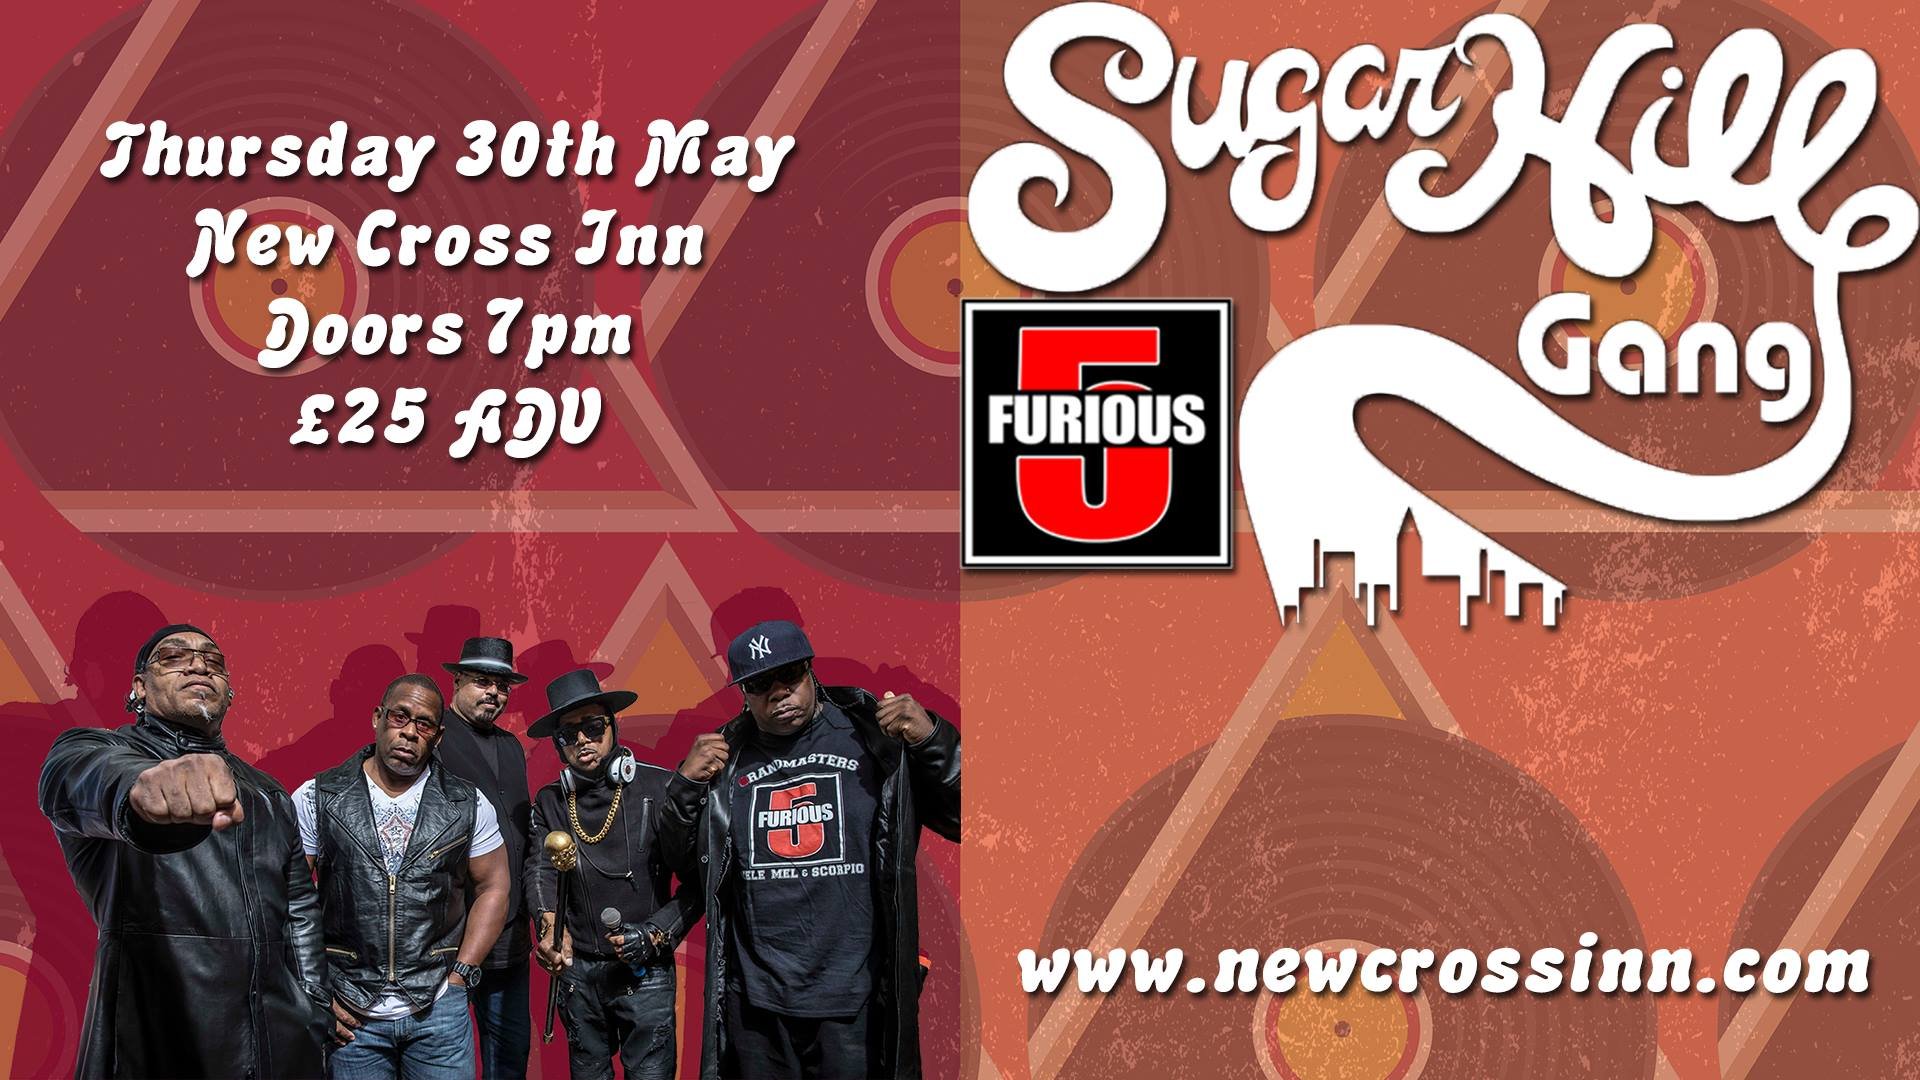 Sugar Hill Gang Furious 5 40 Years Of Rappers Delight Tour At The New Cross Inn London Uk On 30 May 2019 Last Fm